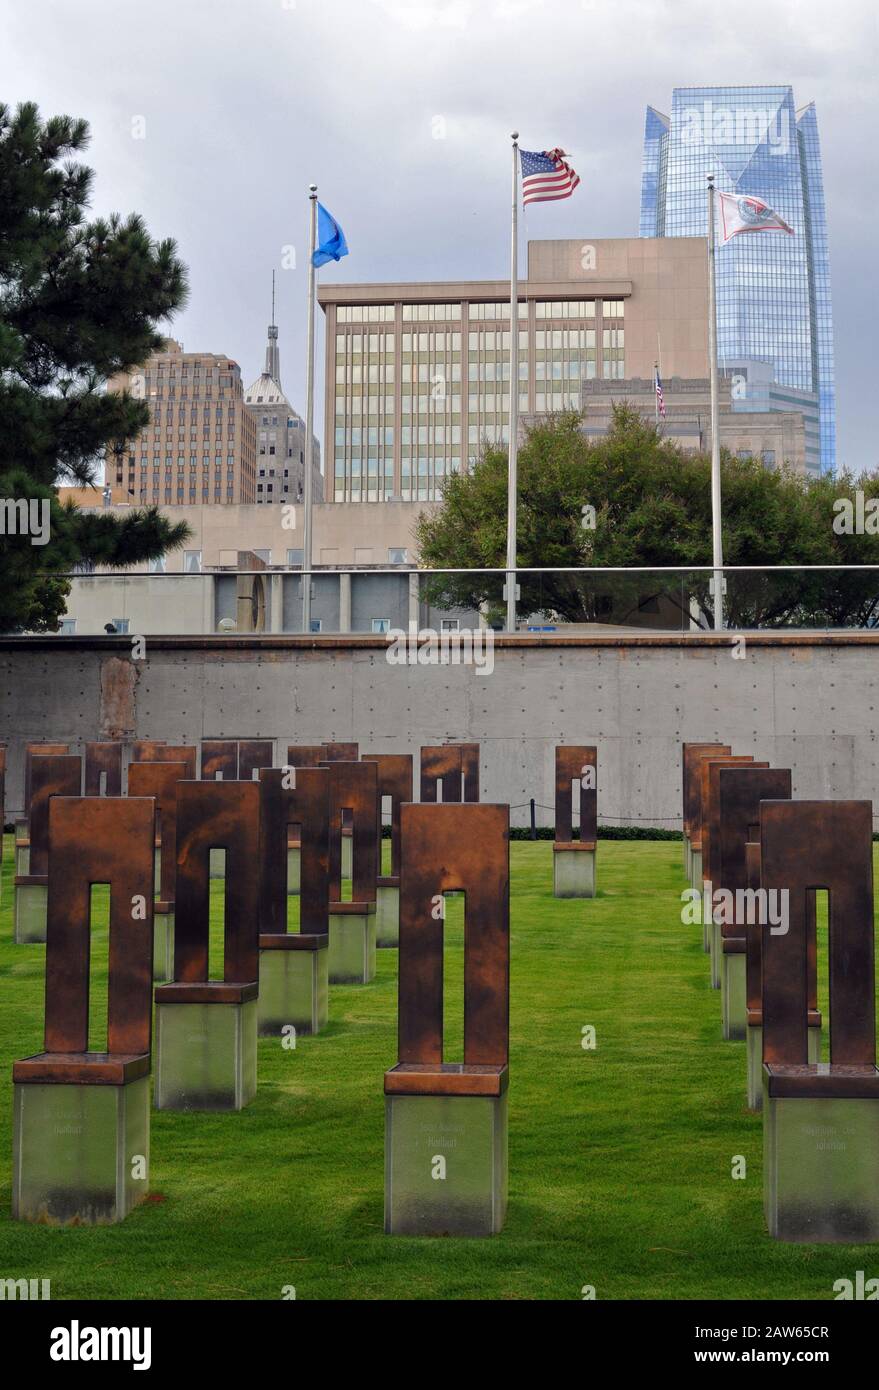 The Field of Empty Chairs at the Oklahoma City National Memorial. Each chair represents one of the 168 victims of the April 19, 1995 truck bombing. Stock Photo